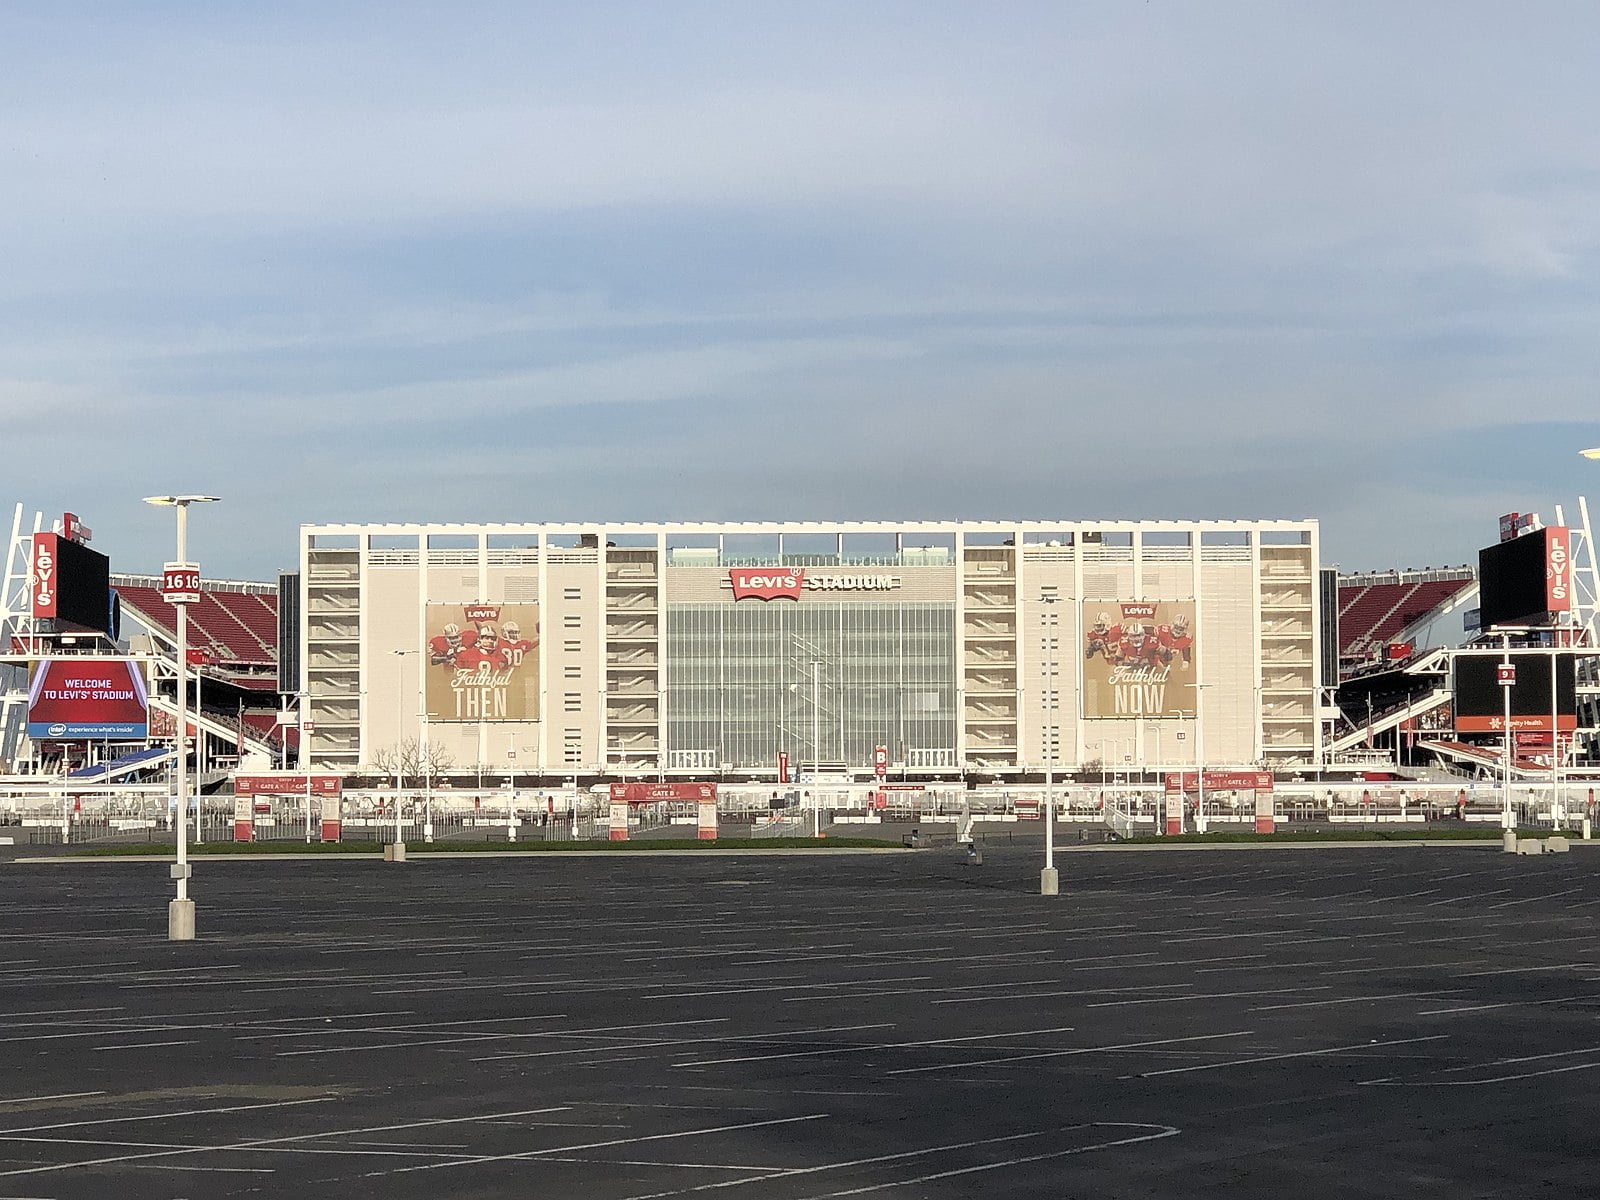 Levi's Stadium: What you need to know to make it a great day